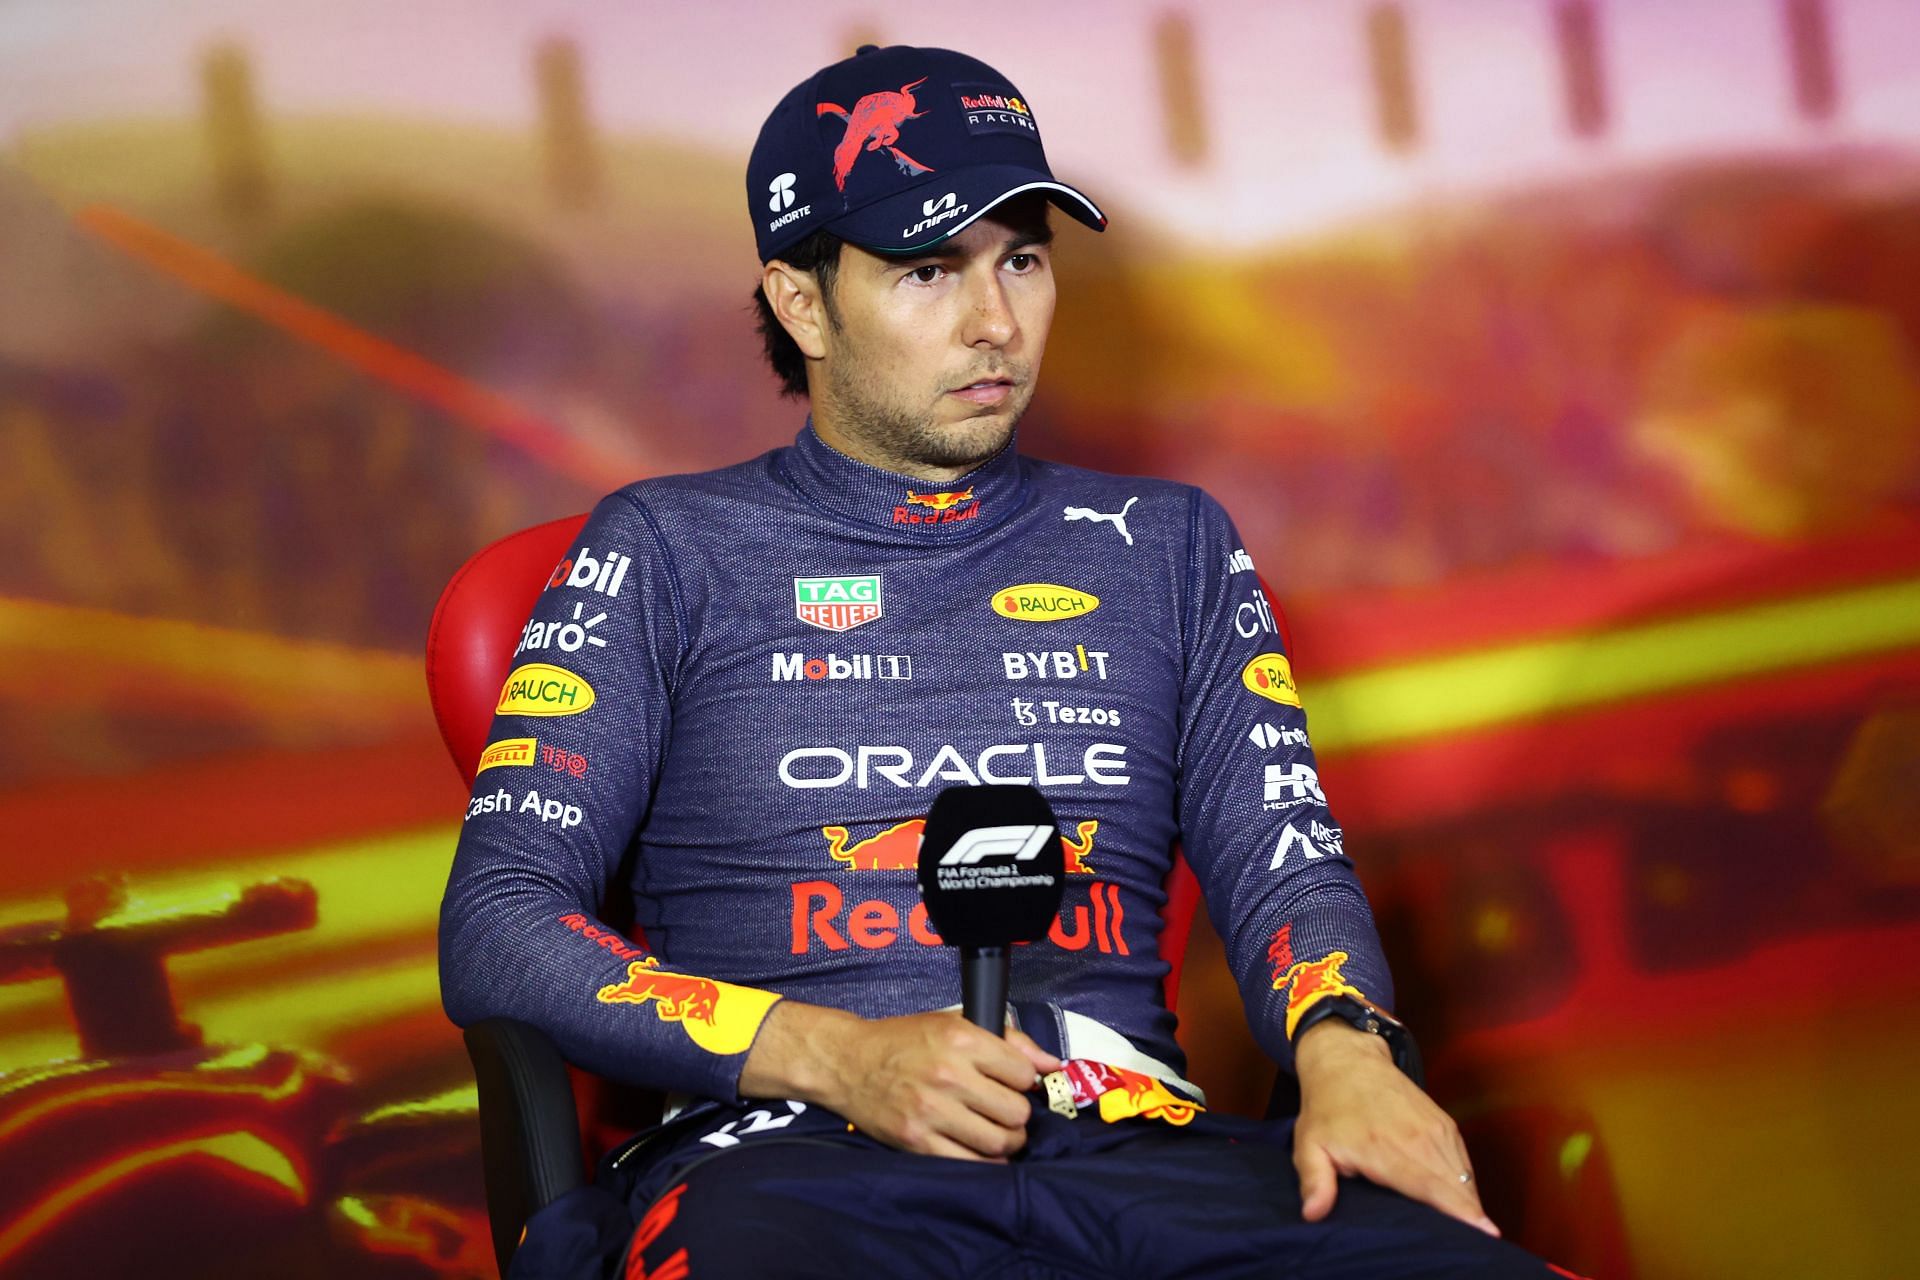 Sergio Perez addresses the media after his P2 finish at the 2022 F1 Spanish GP (Photo by Dan Istitene/Getty Images)